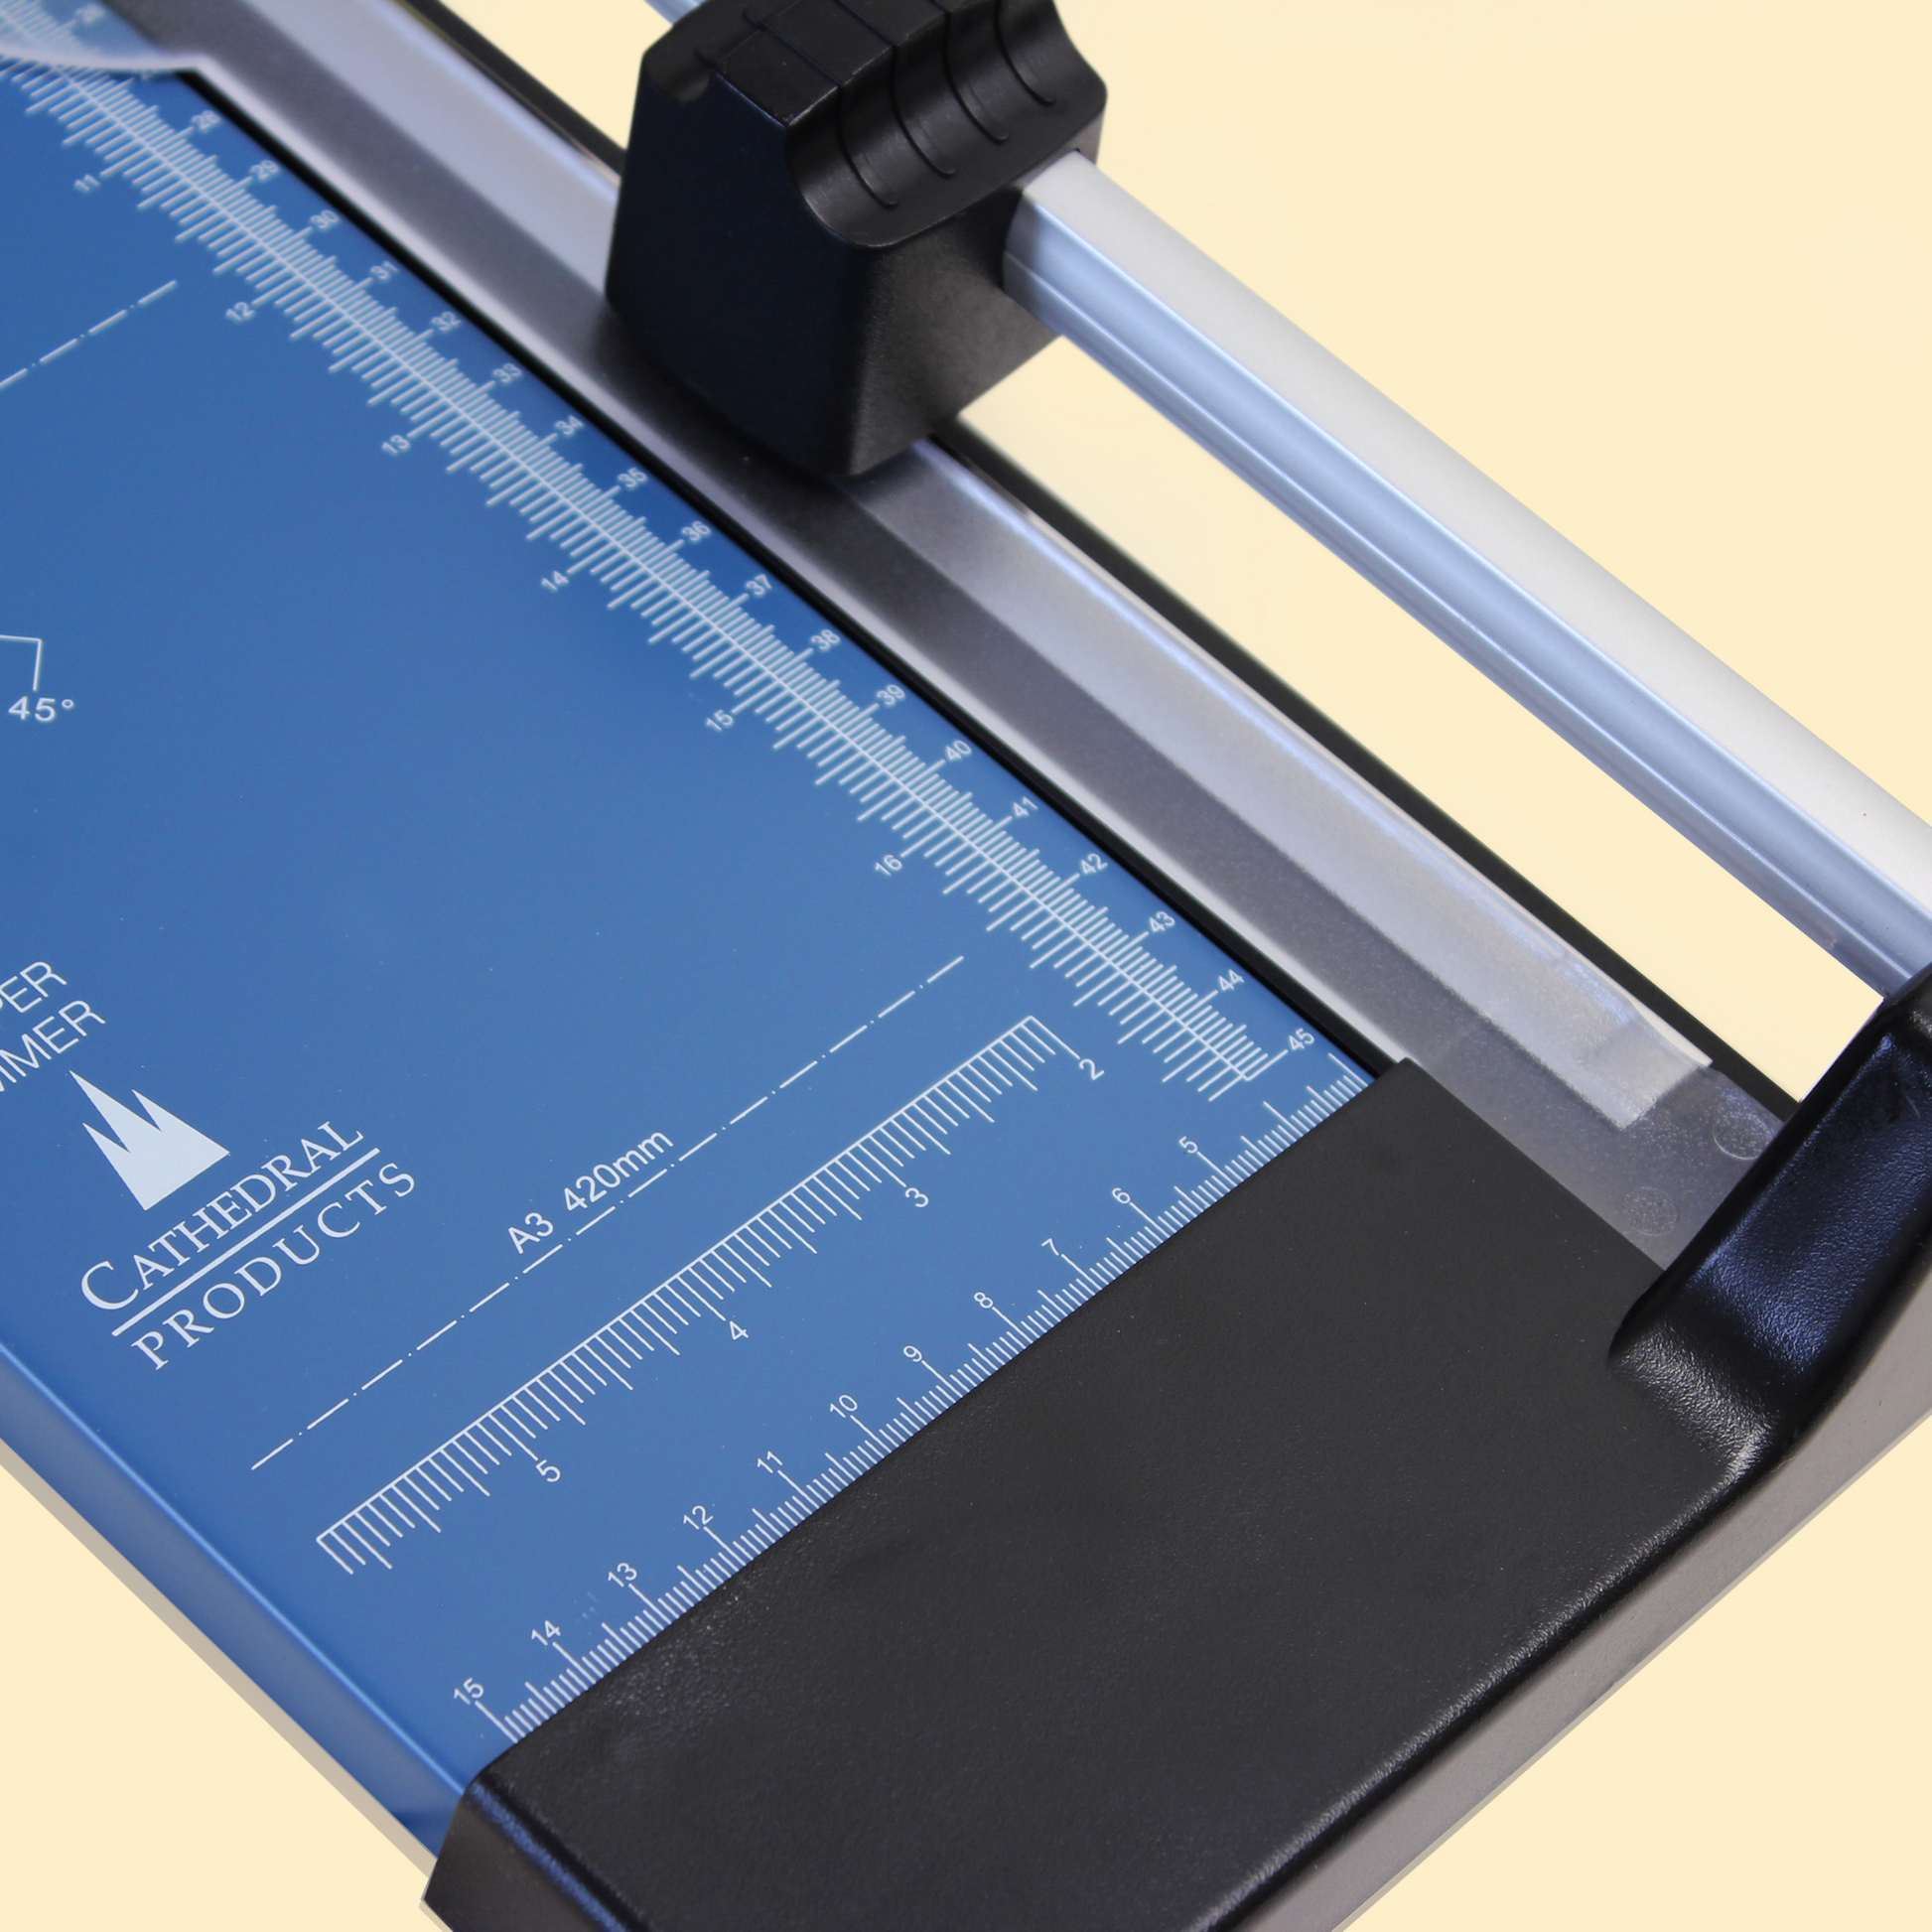 Zoomed-in view of the measurement details on the blue metal base of a Cathedral Products A3 rotary paper trimmer, highlighting the precise calibration for various paper sizes and angled cuts.